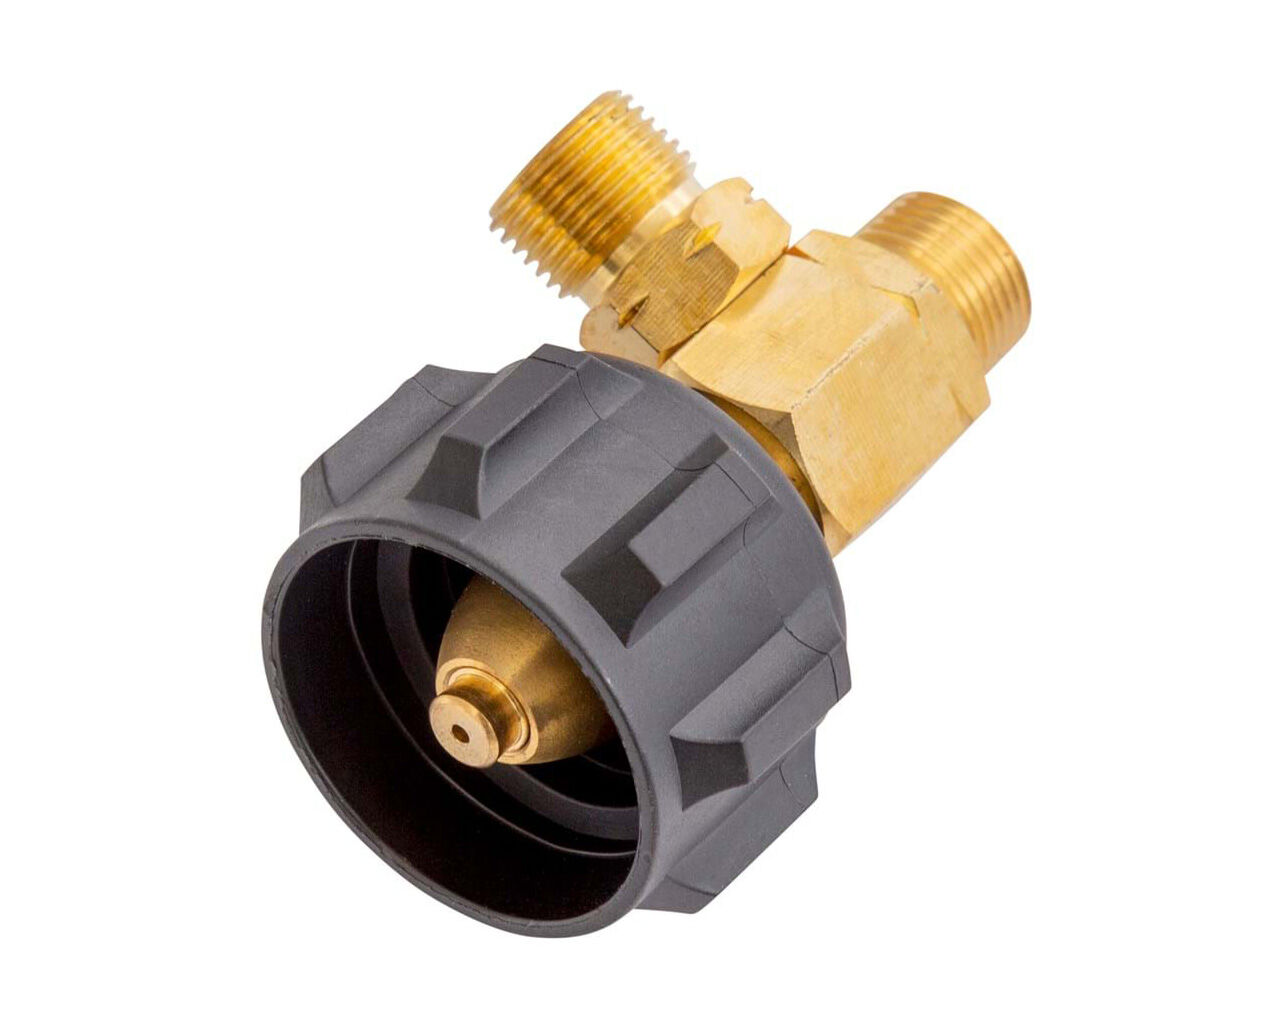 Gasmate Adaptor - LCC27 TO TWIN 3/8" BSPP LH